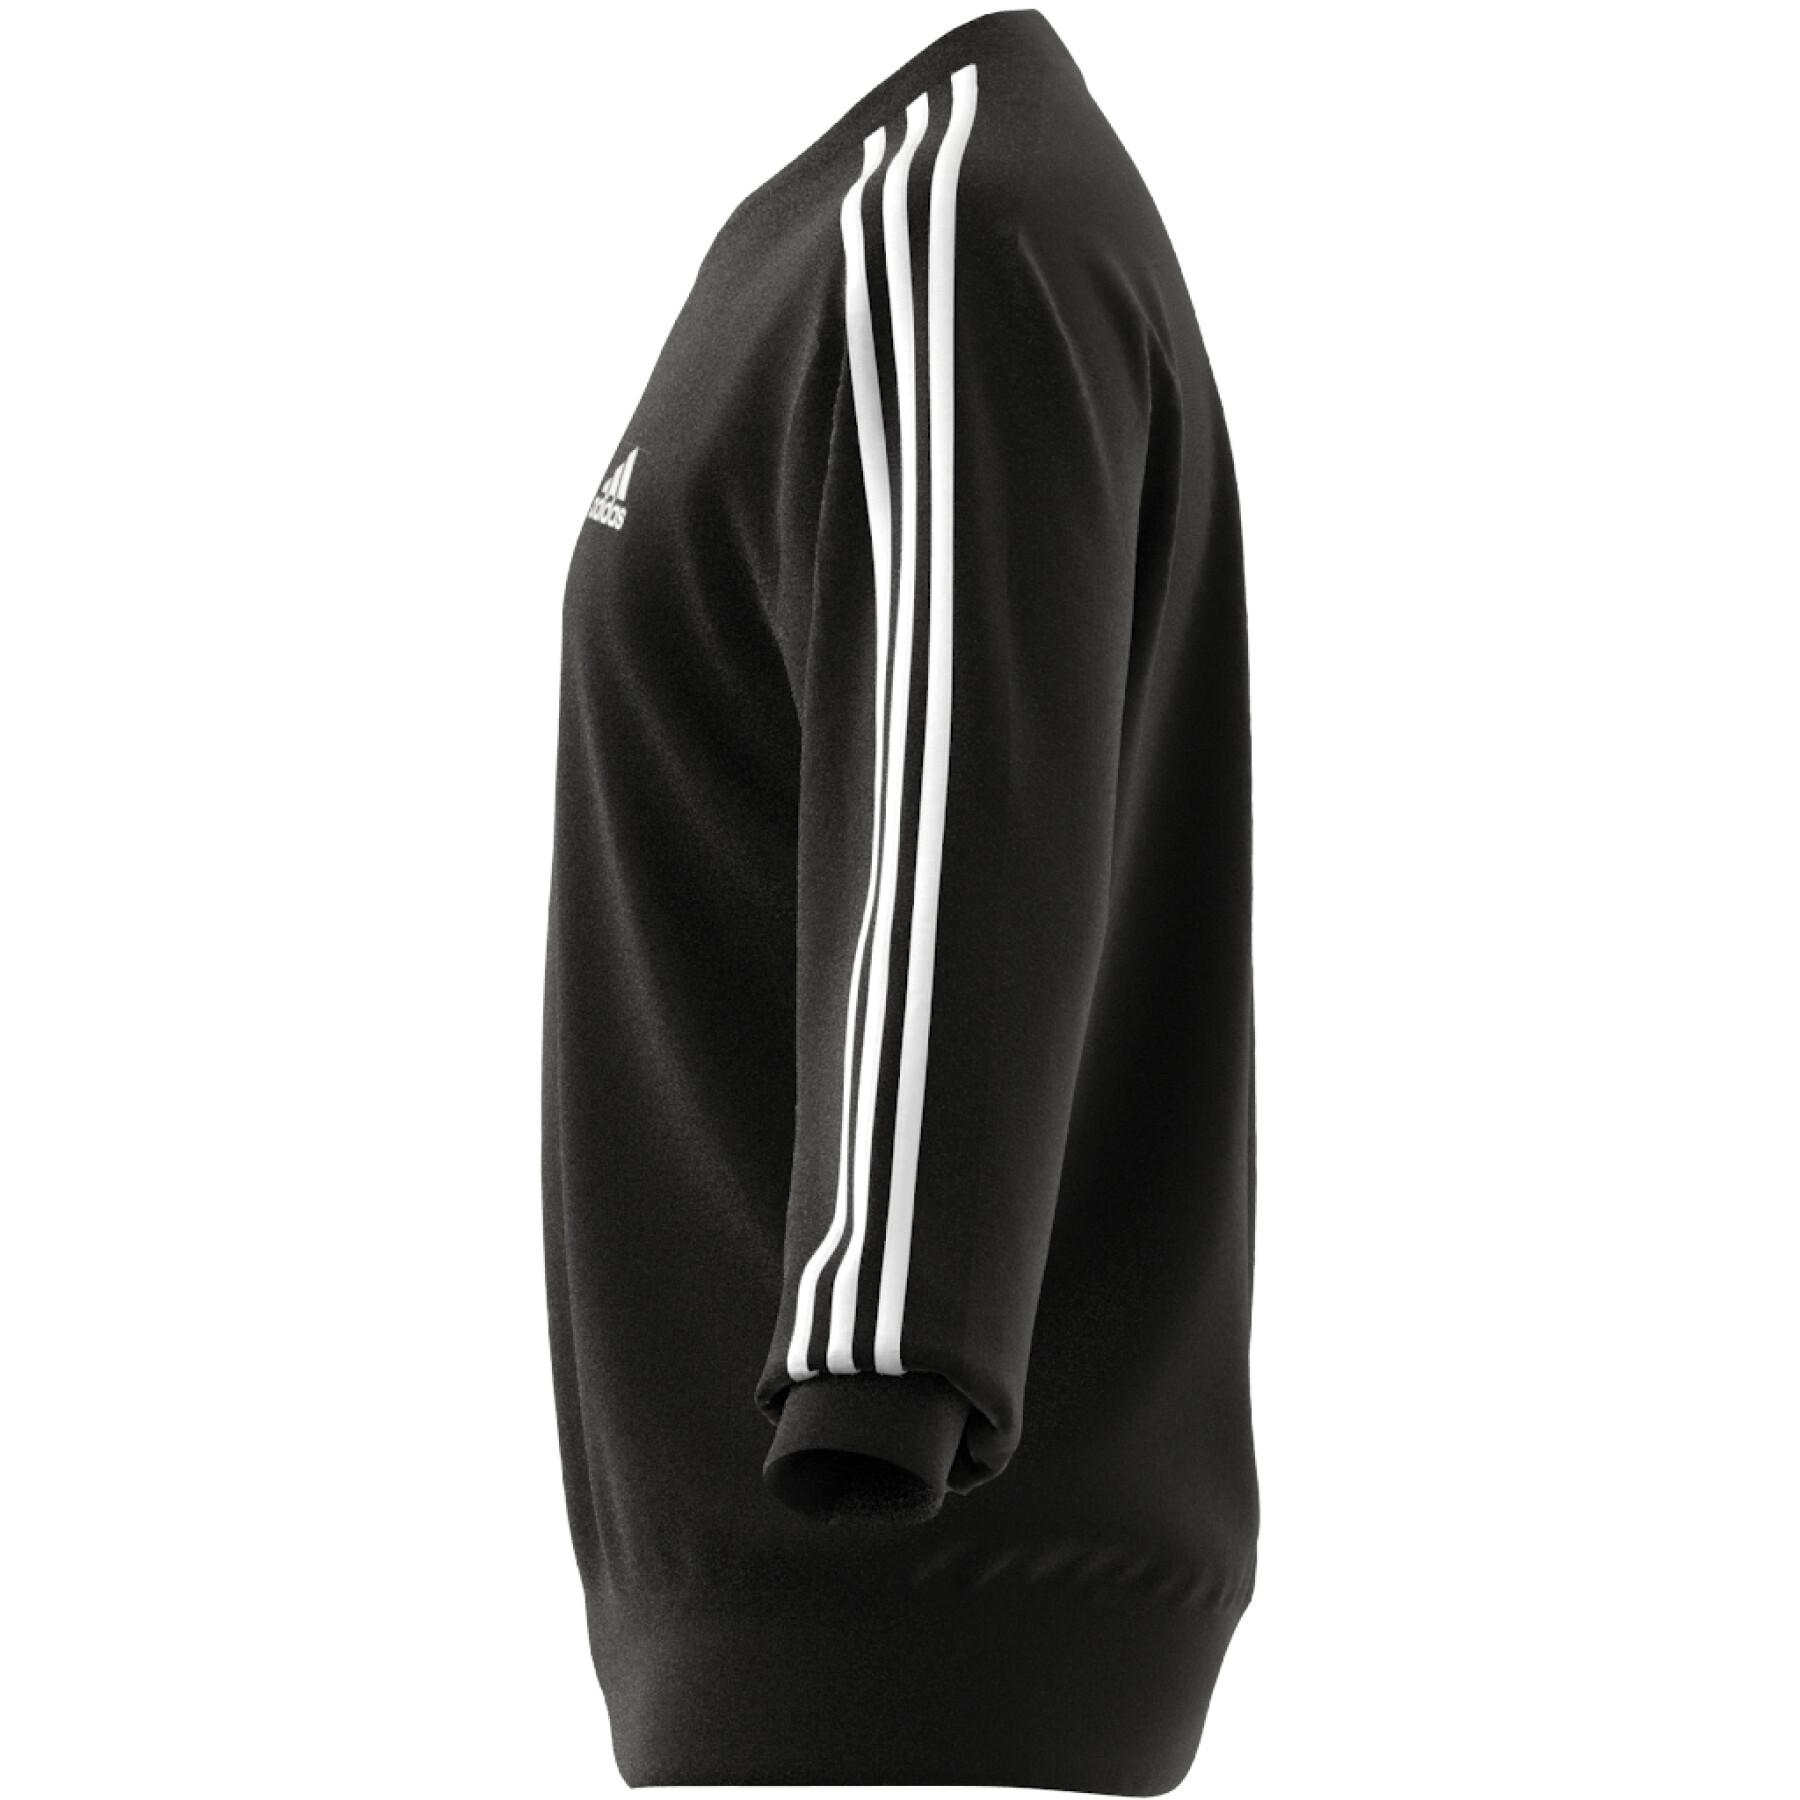 adidas - Men's Essentials French Terry 3 Stripes Sweater (IC9317)